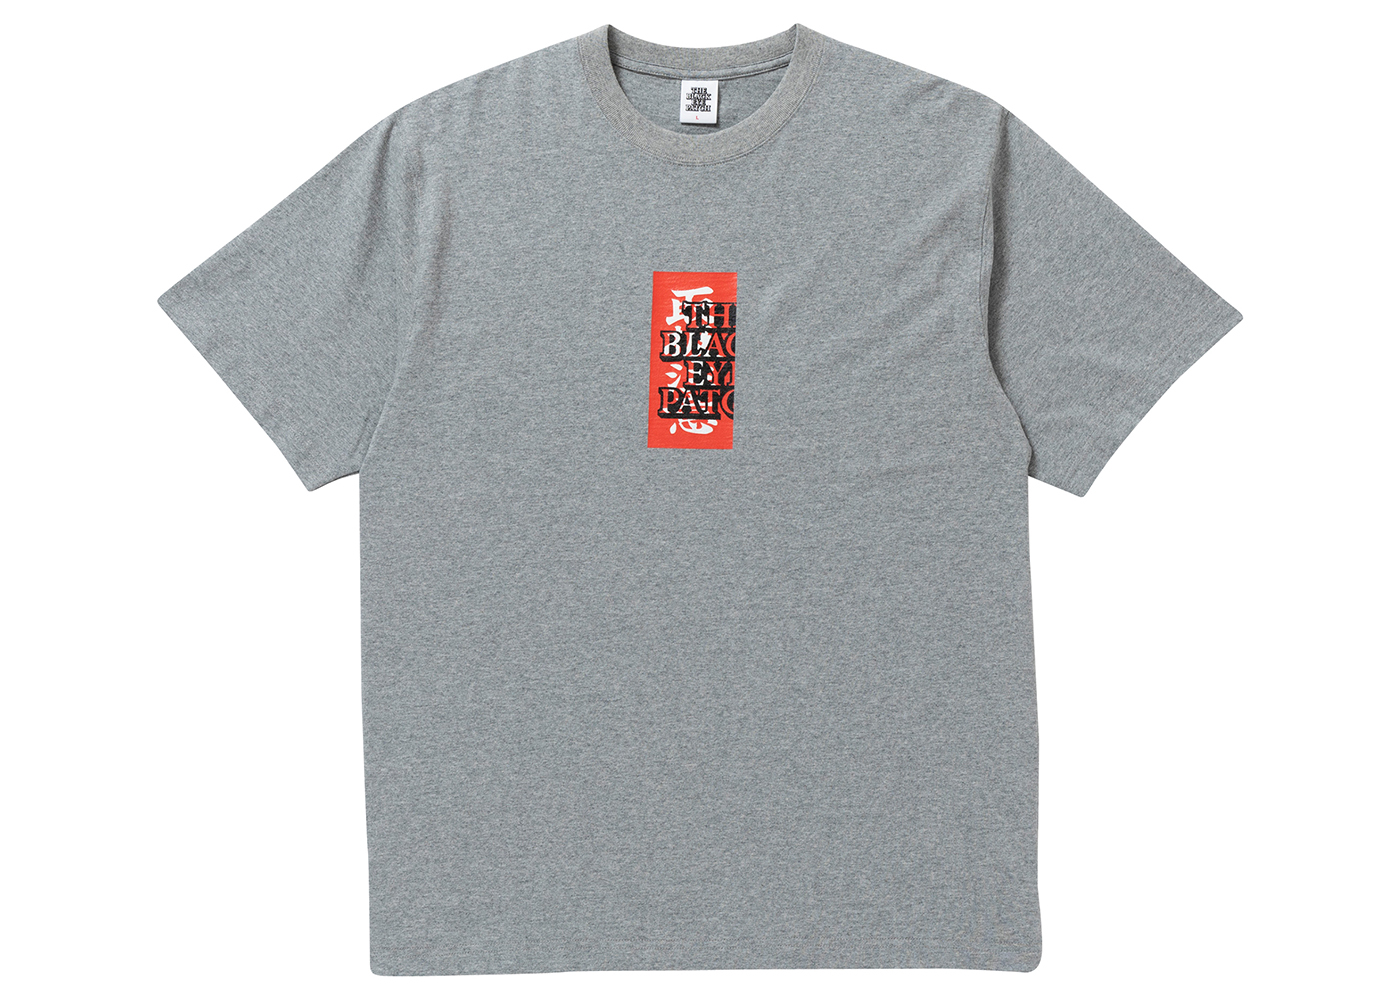 BlackEyePatch Handle with Care Label Tee Grey - SS22 - KR